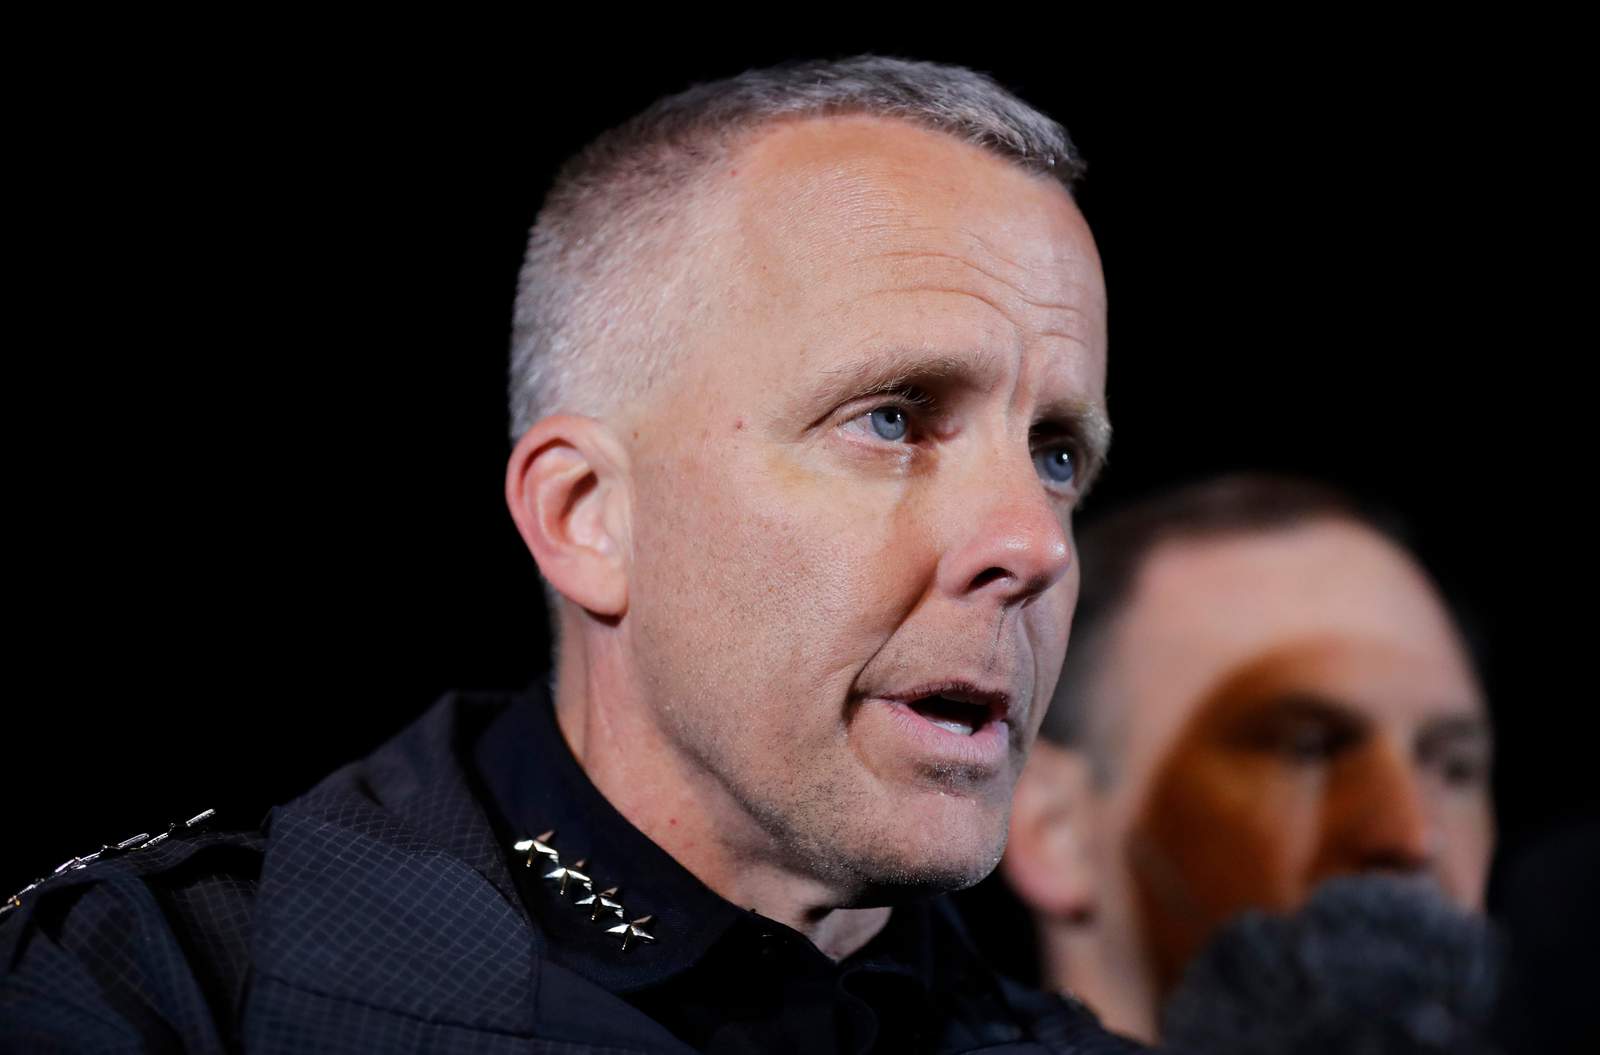 Austin police chief retires after criticism for use of force